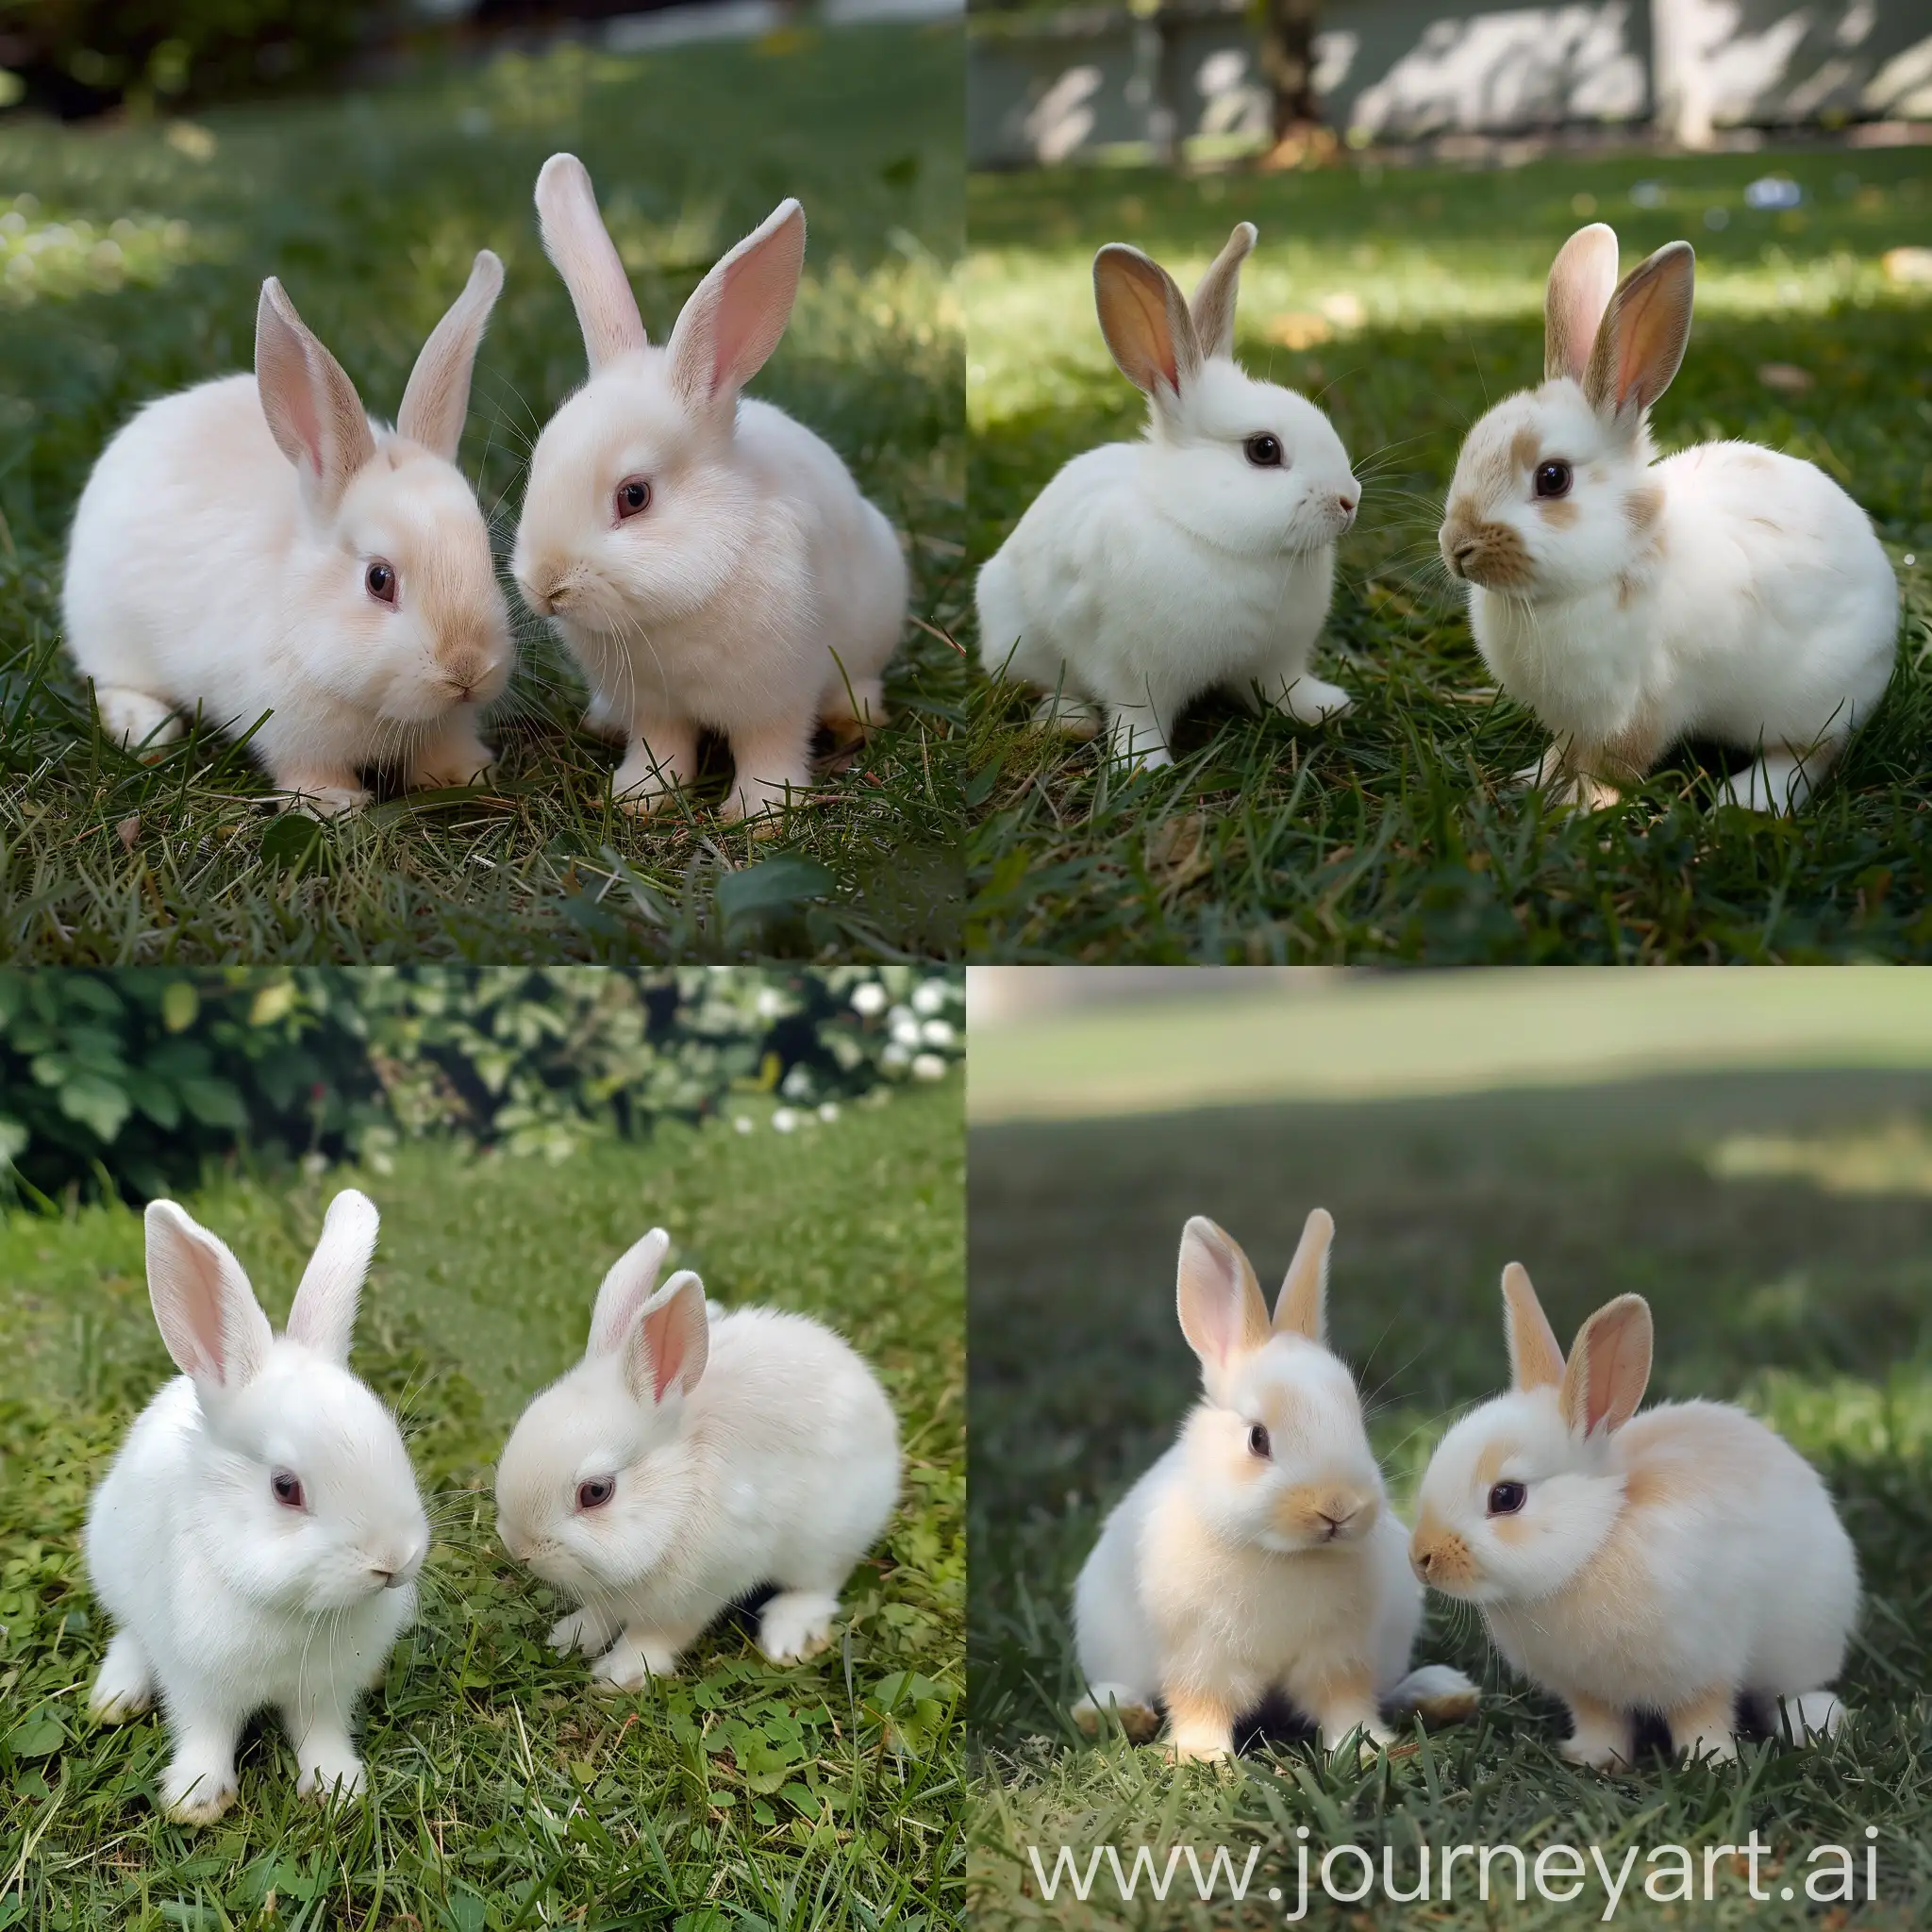 Two-Cute-White-Rabbits-Grazing-on-Lush-Green-Grass